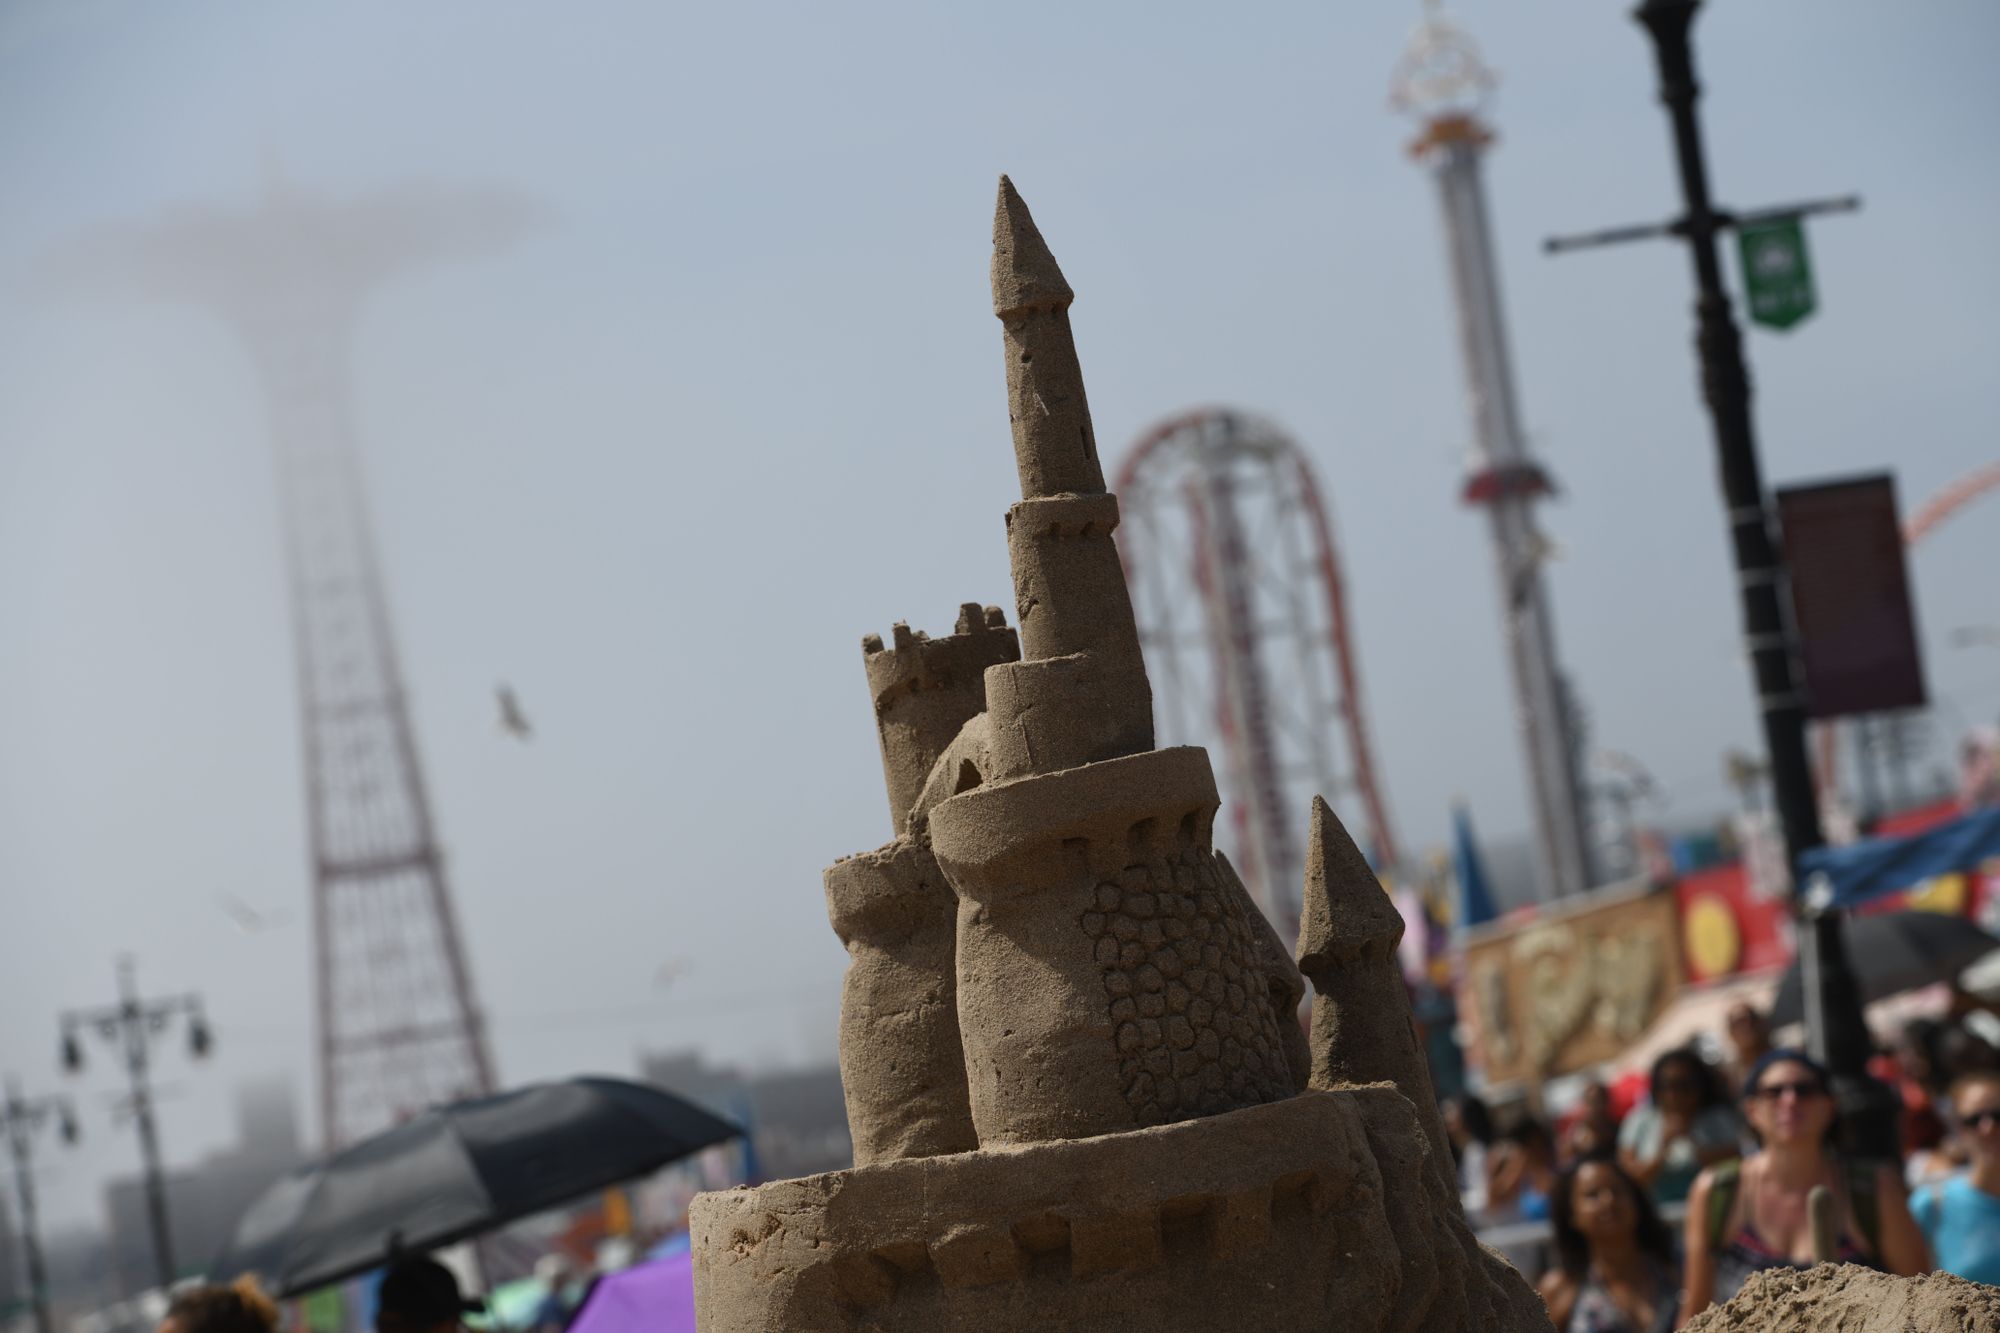 29th Annual Coney Island Sand Sculpture Competition: Photos